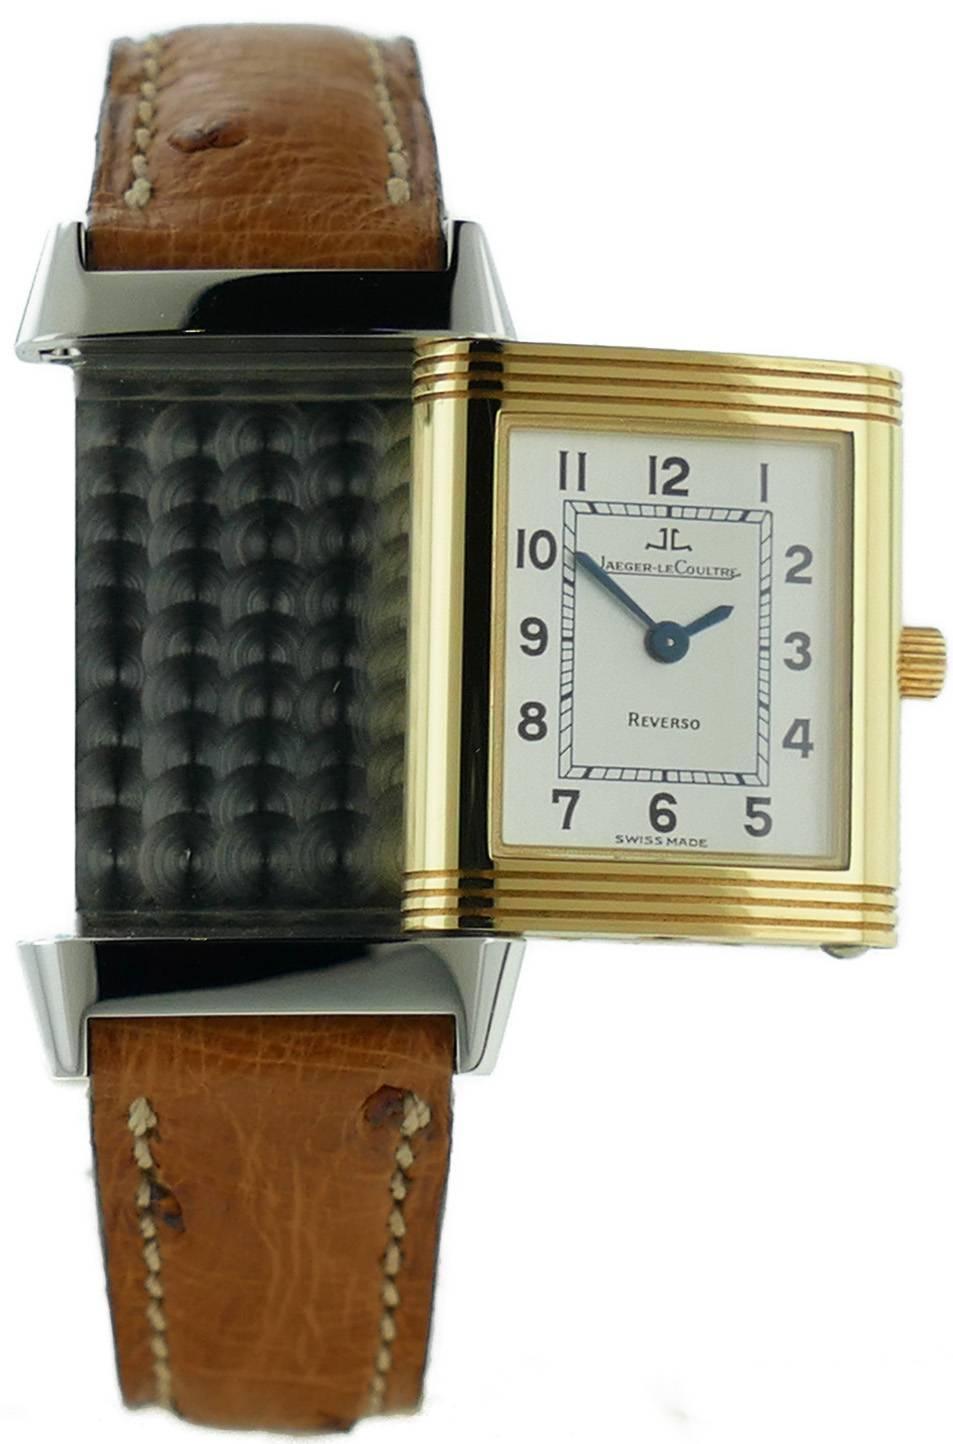 Ladies (20x28mm) Jaeger LeCoultre Reverso 18k Yellow Gold & Stainless Steel Watch, Ref 260.5.08. The Watch is in Great Condition & Keeping Perfect Time; Movement is Battery Operated. The Watch is on a Jaeger Ostrich Strap & Jaeger Deployment Buckle.